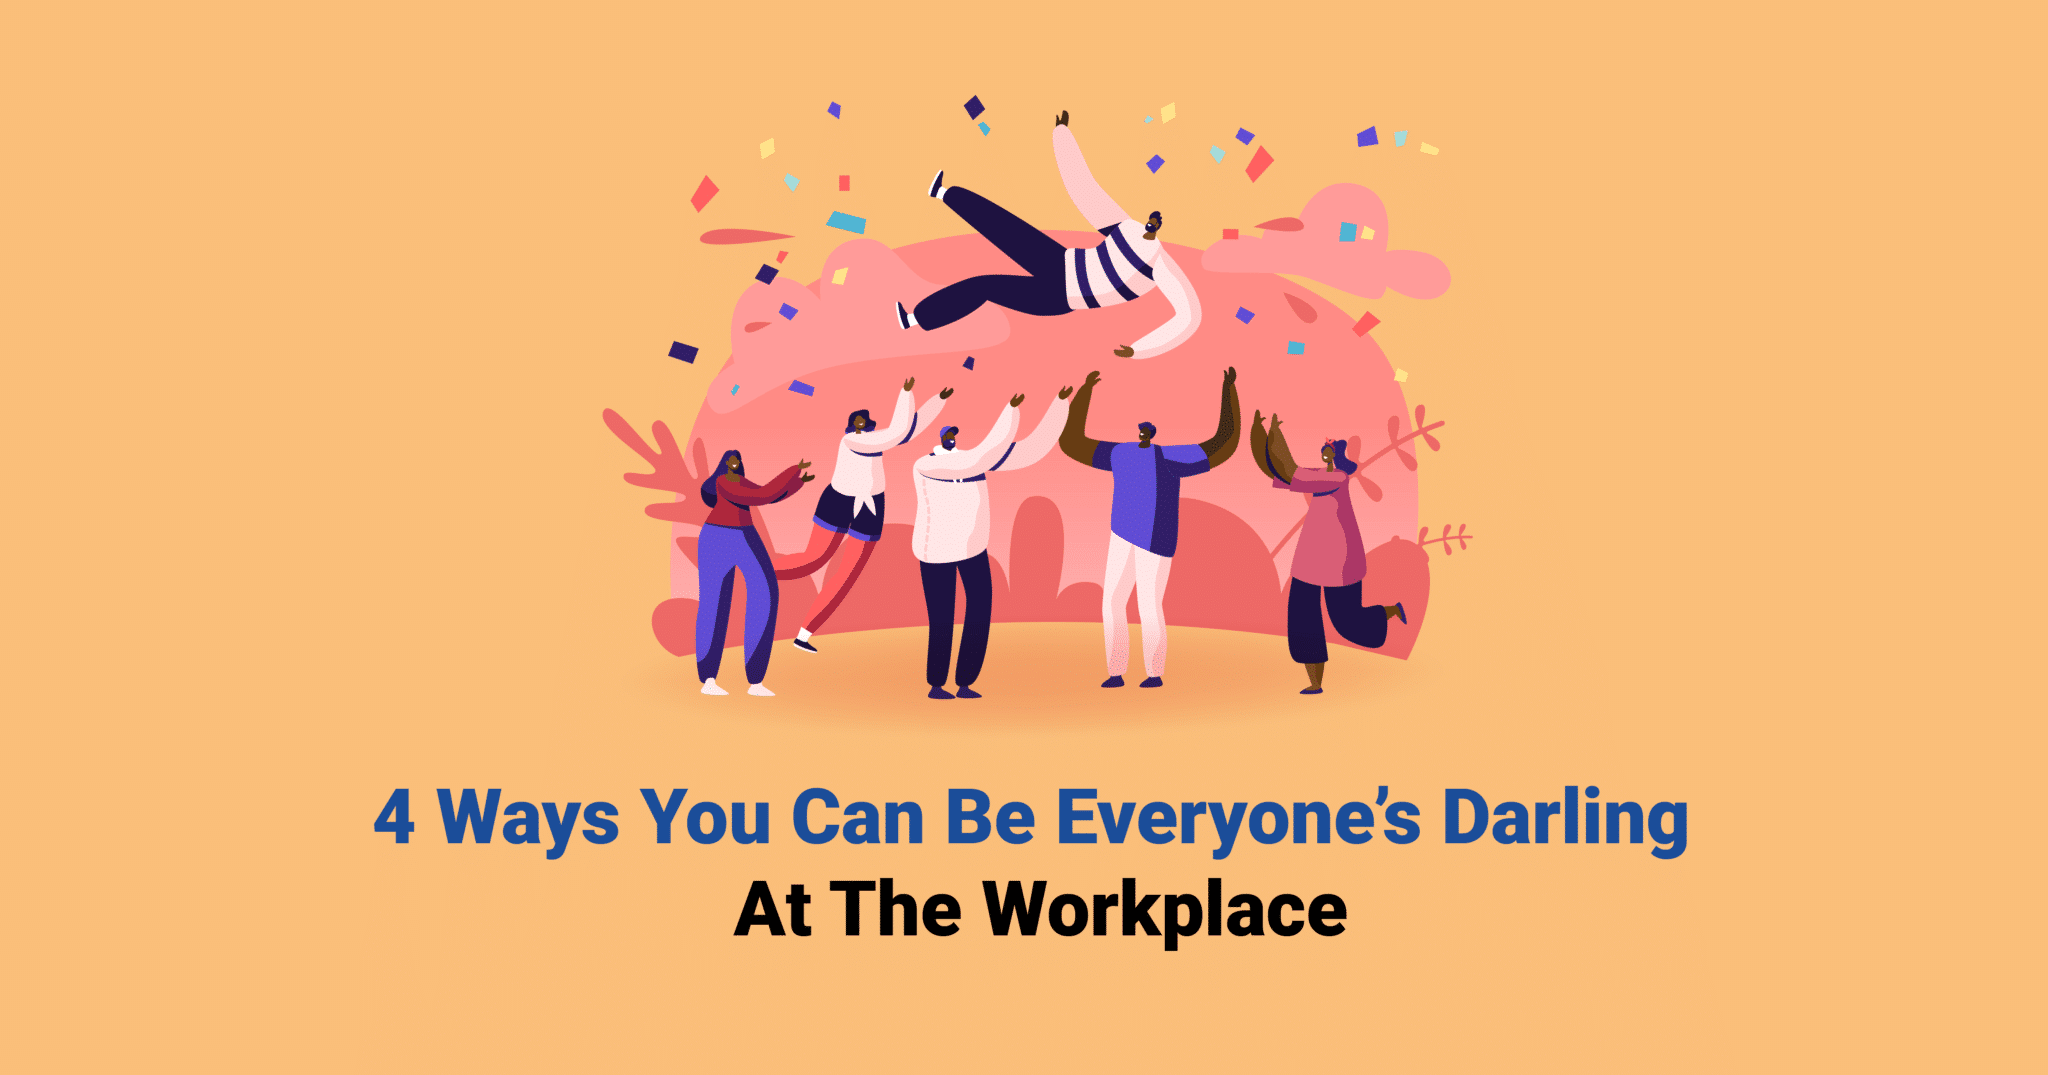 4 ways you can be everyone’s darling at the workplace